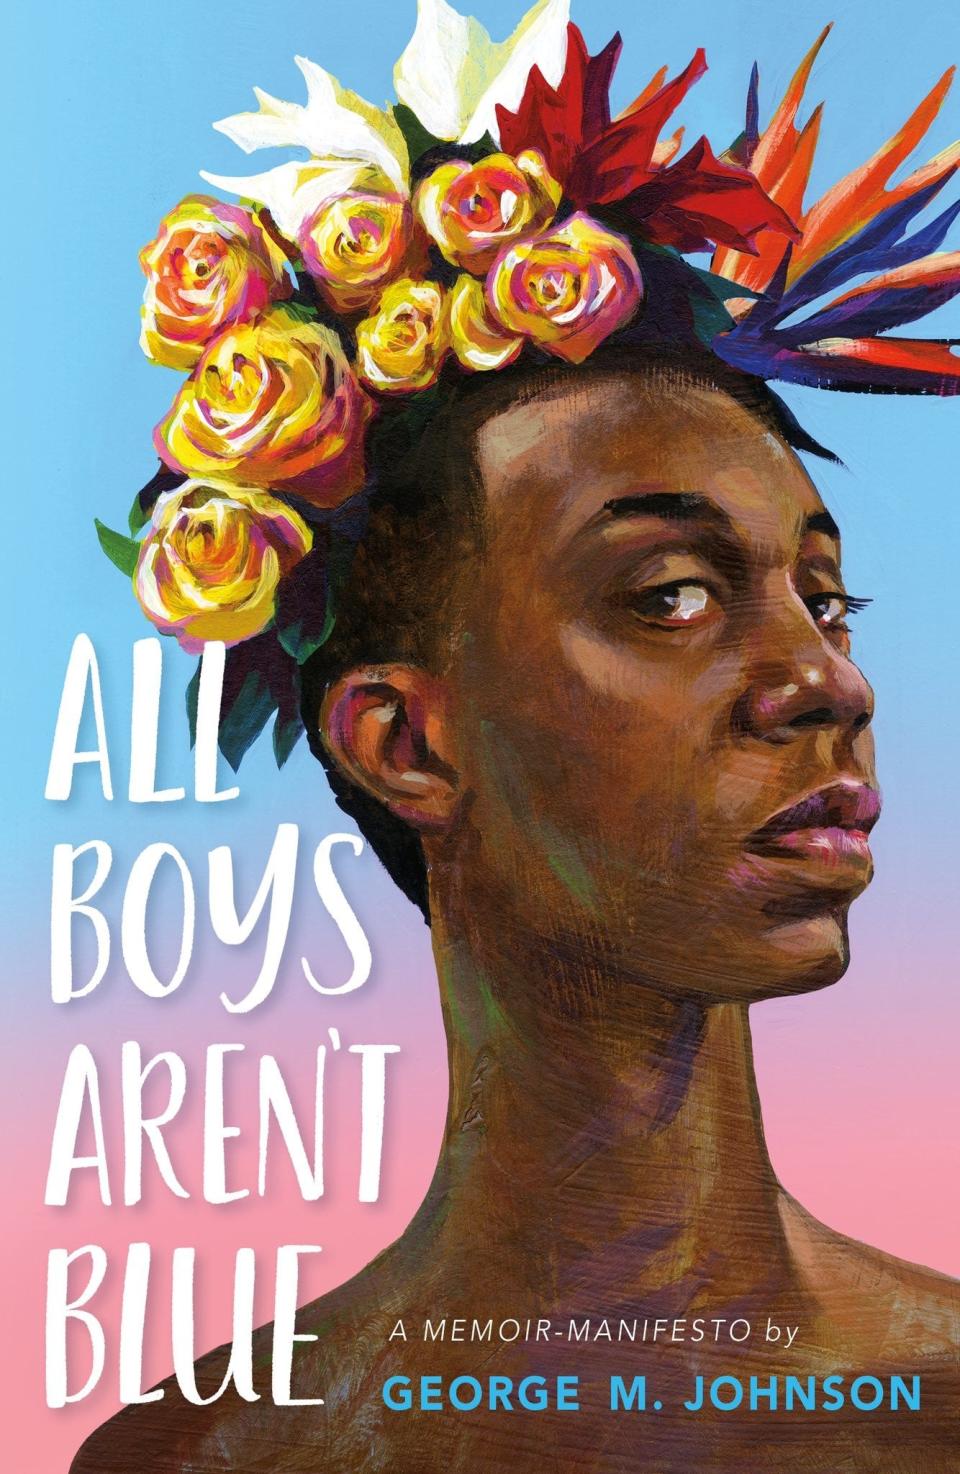 Watch George M. Johnson's memoir come to life in "All Boys Aren't Blue."